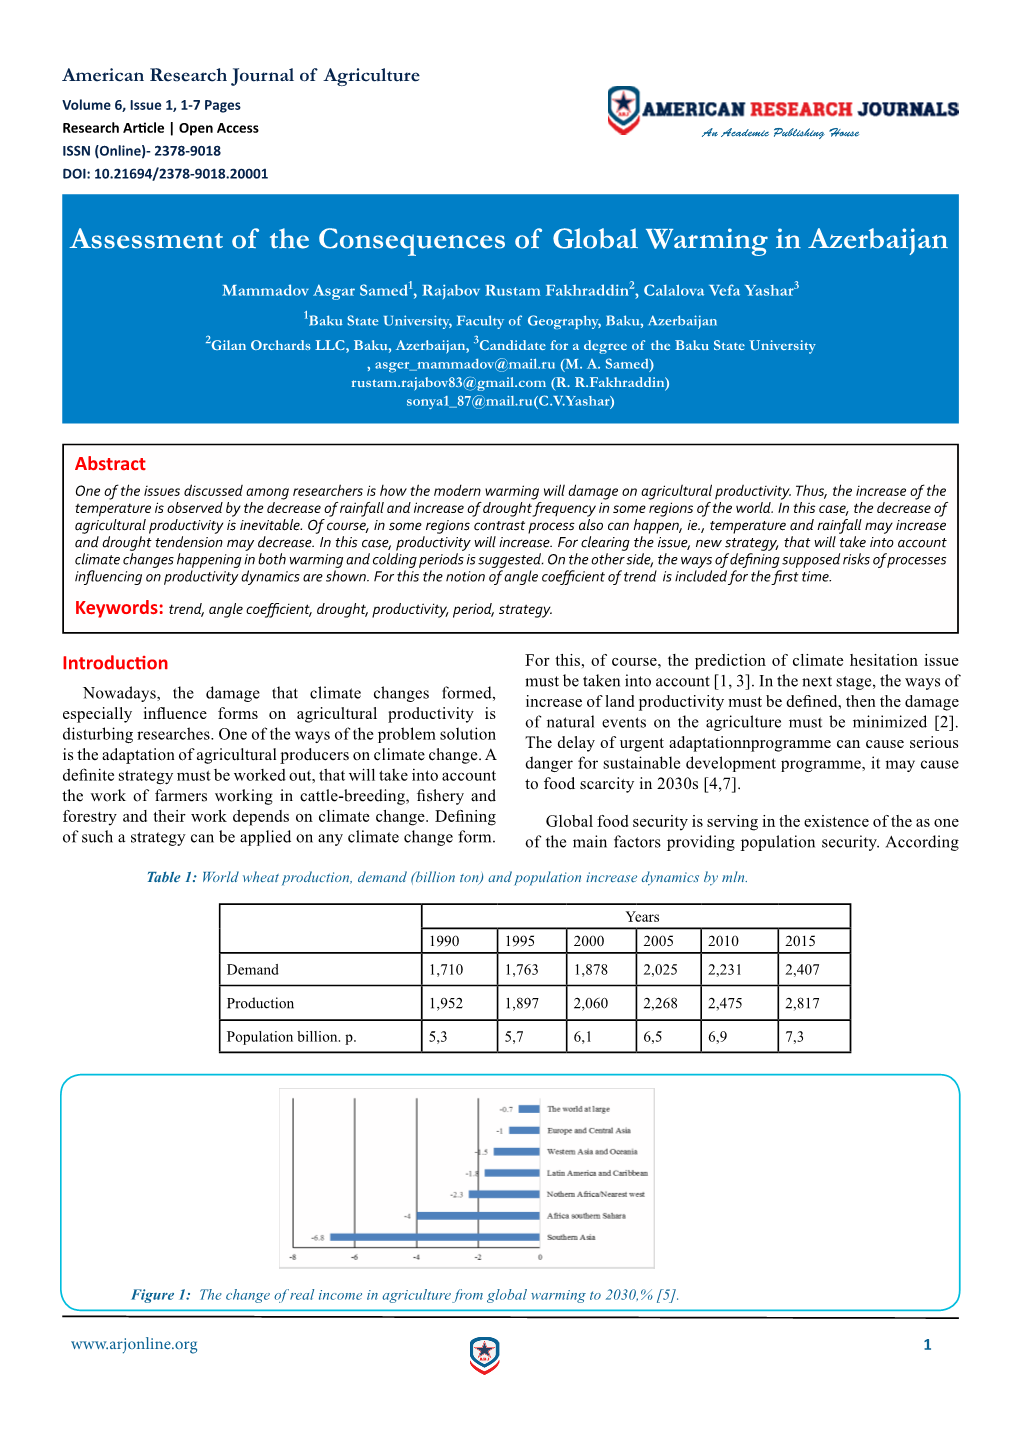 Assessment of the Consequences of Global Warming in Azerbaijan